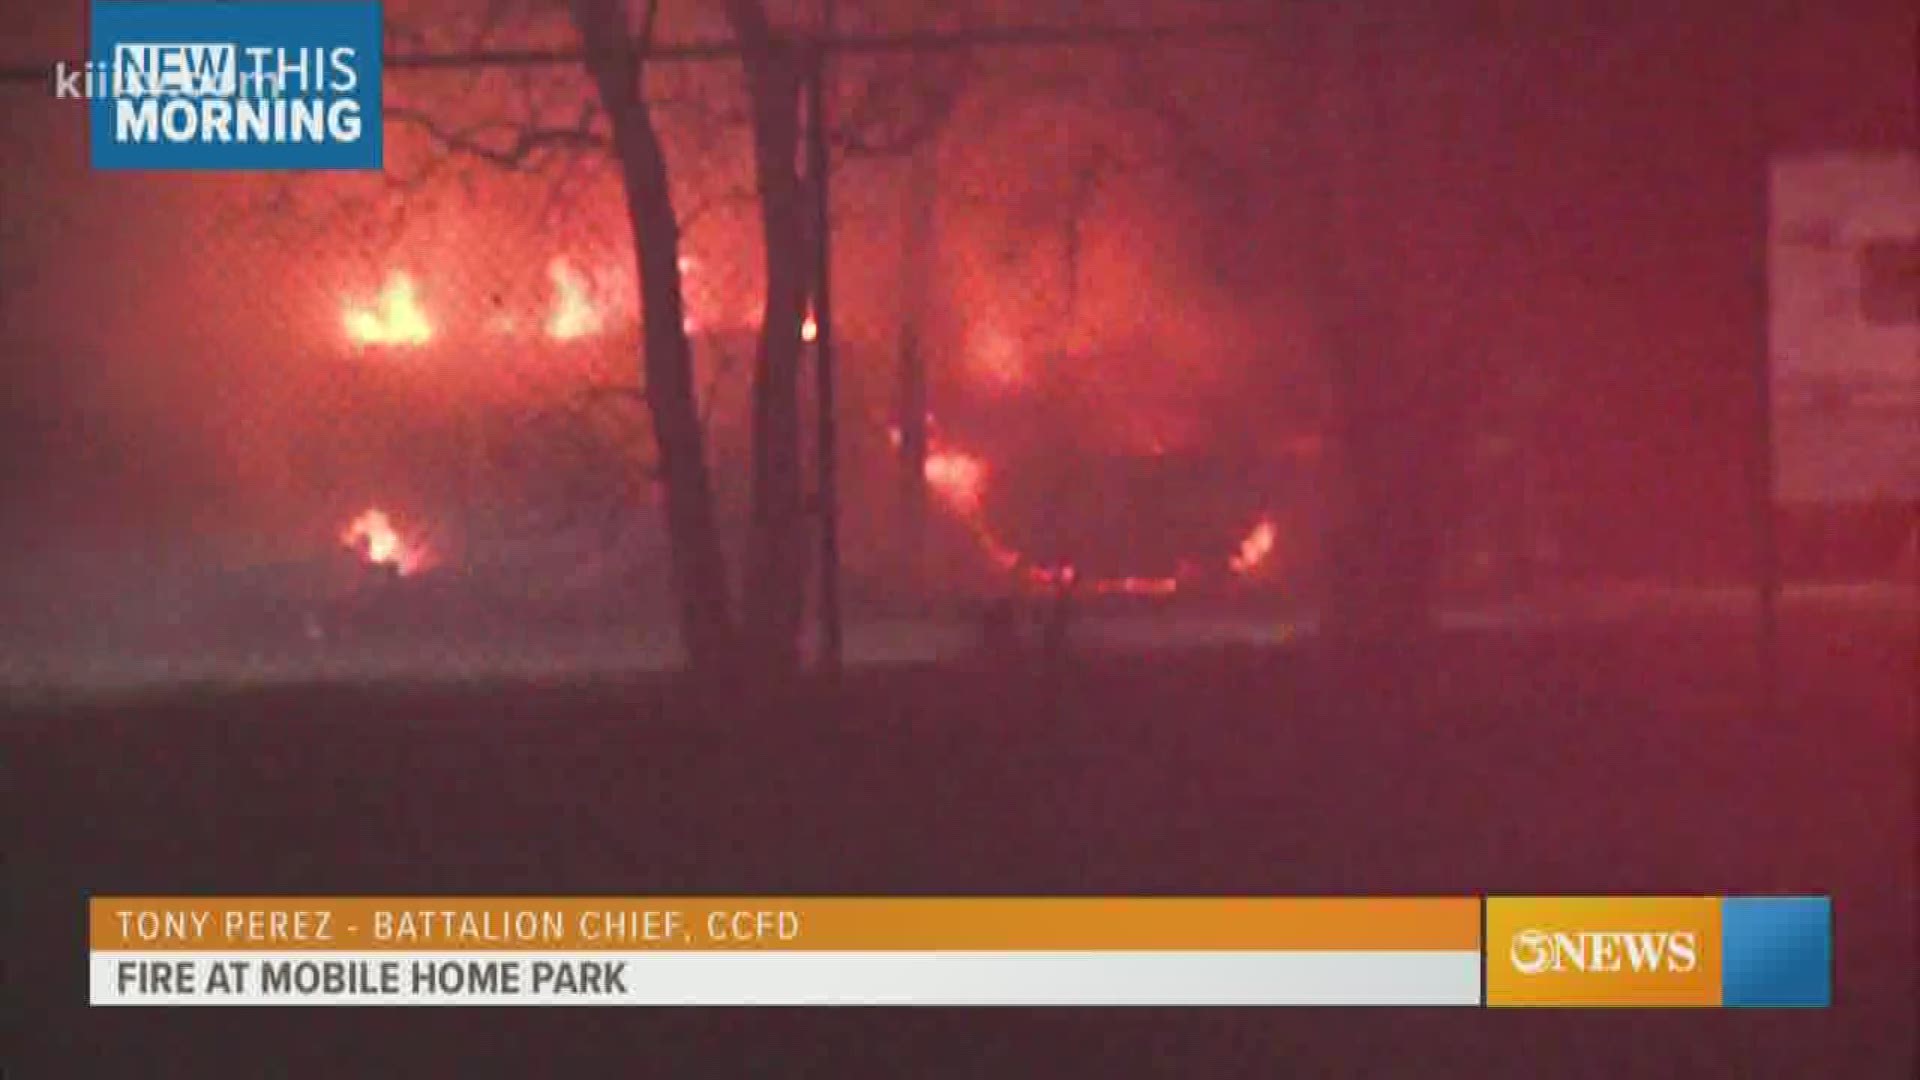 Multiple units were called to respond to a fire that broke out early Monday morning at an RV park.